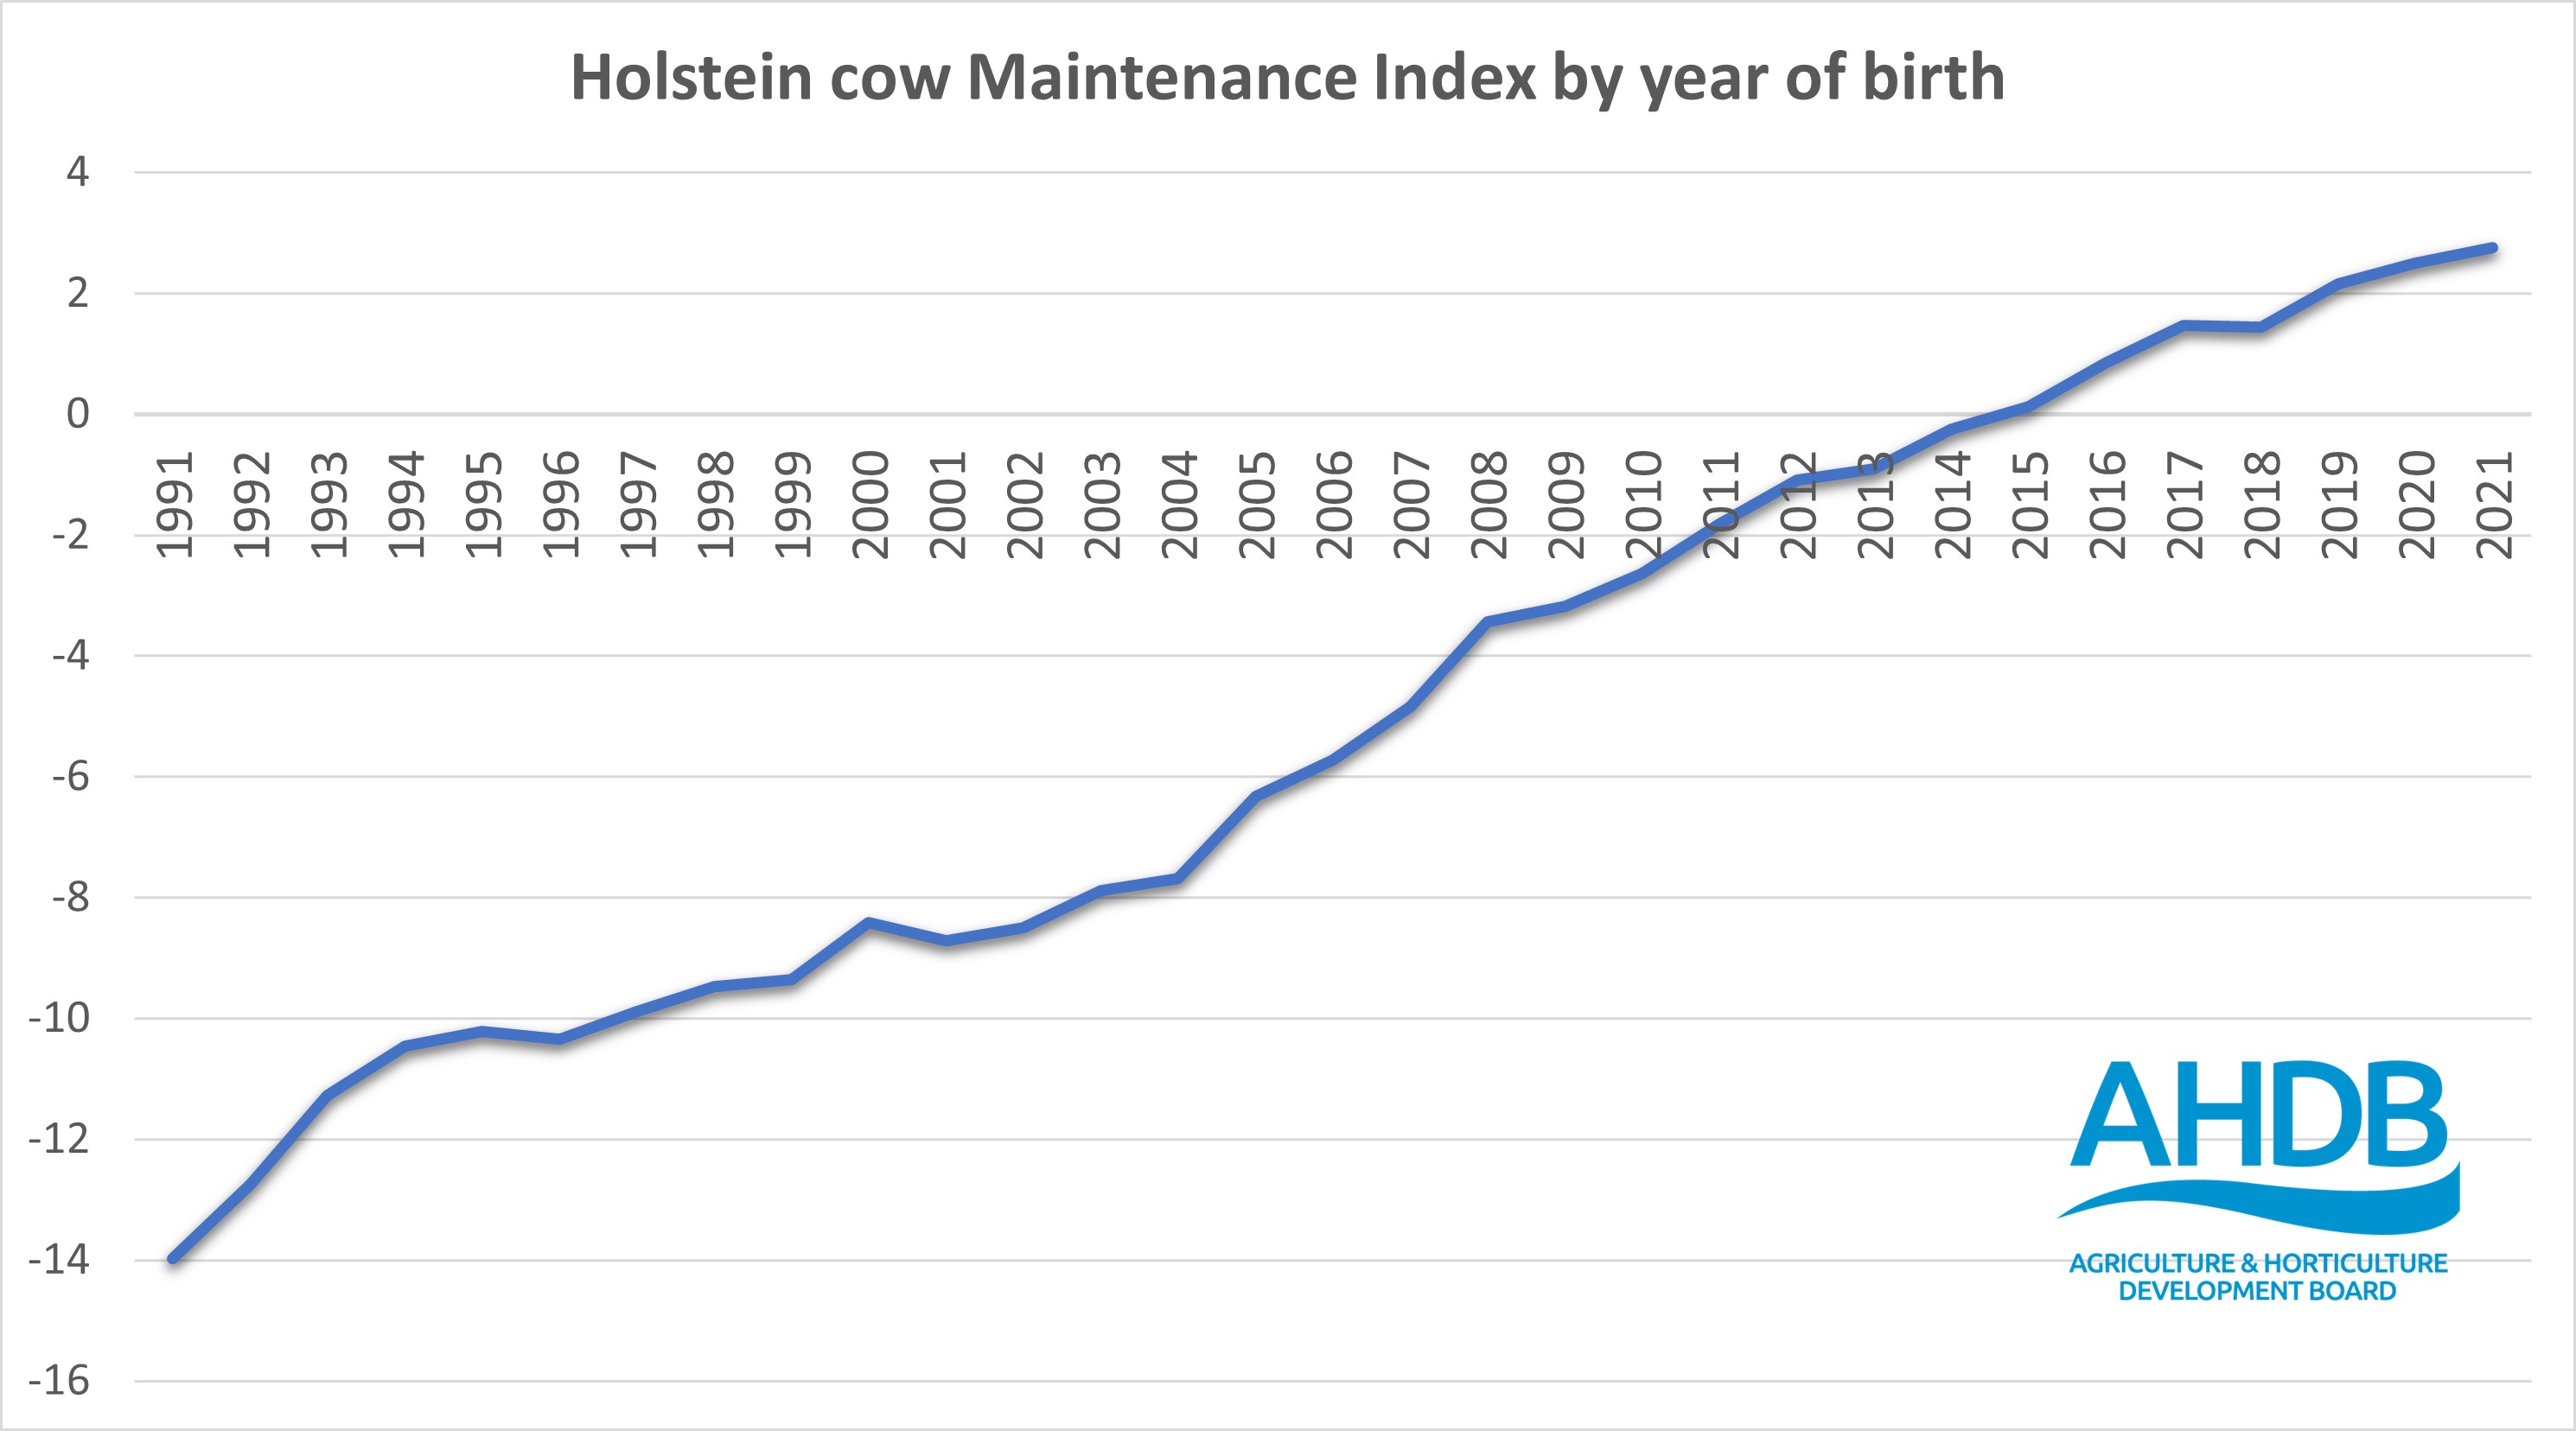 Graph showing Holstein cow maintenance index from -14 in 1991 to +3 in 2021